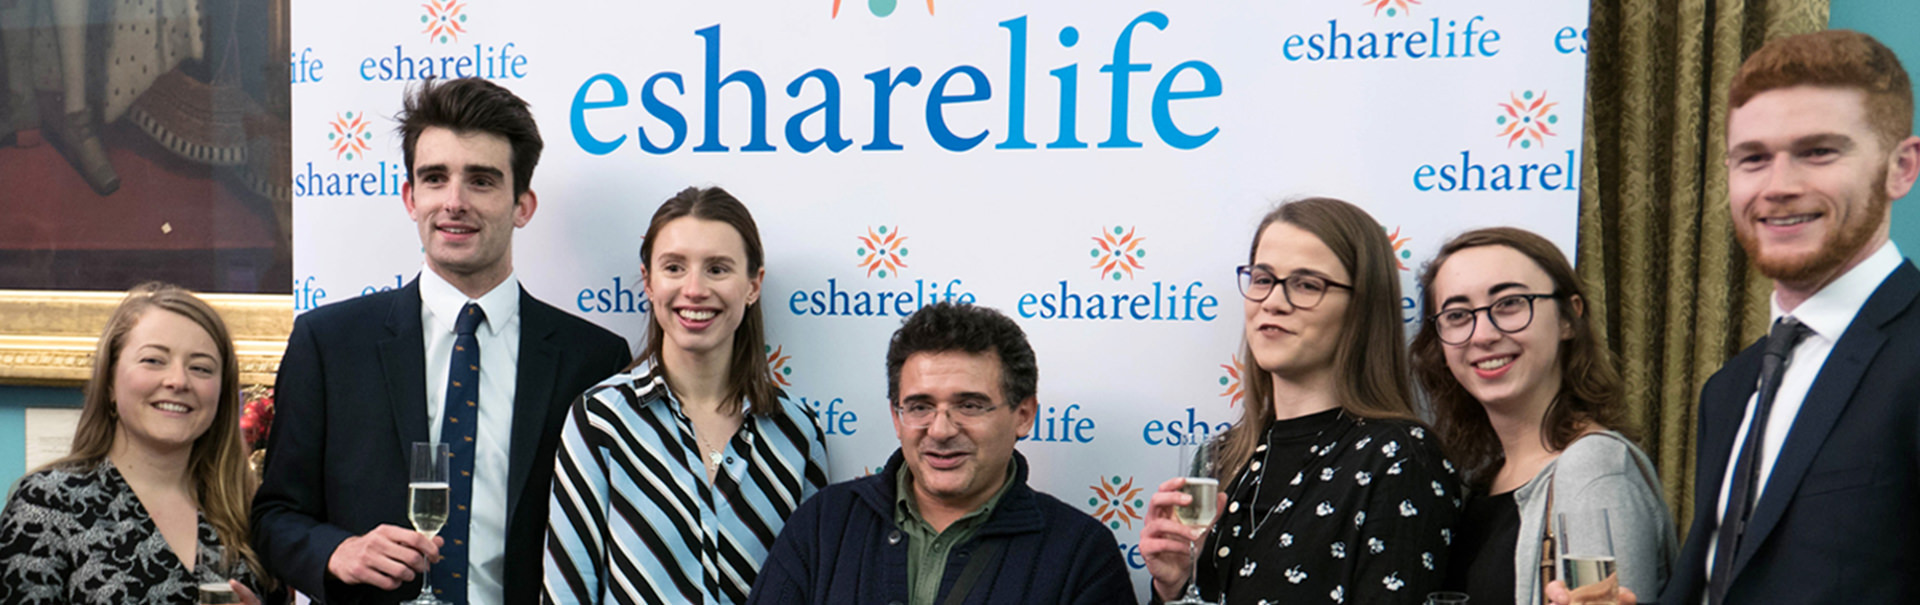 Esharelife Party